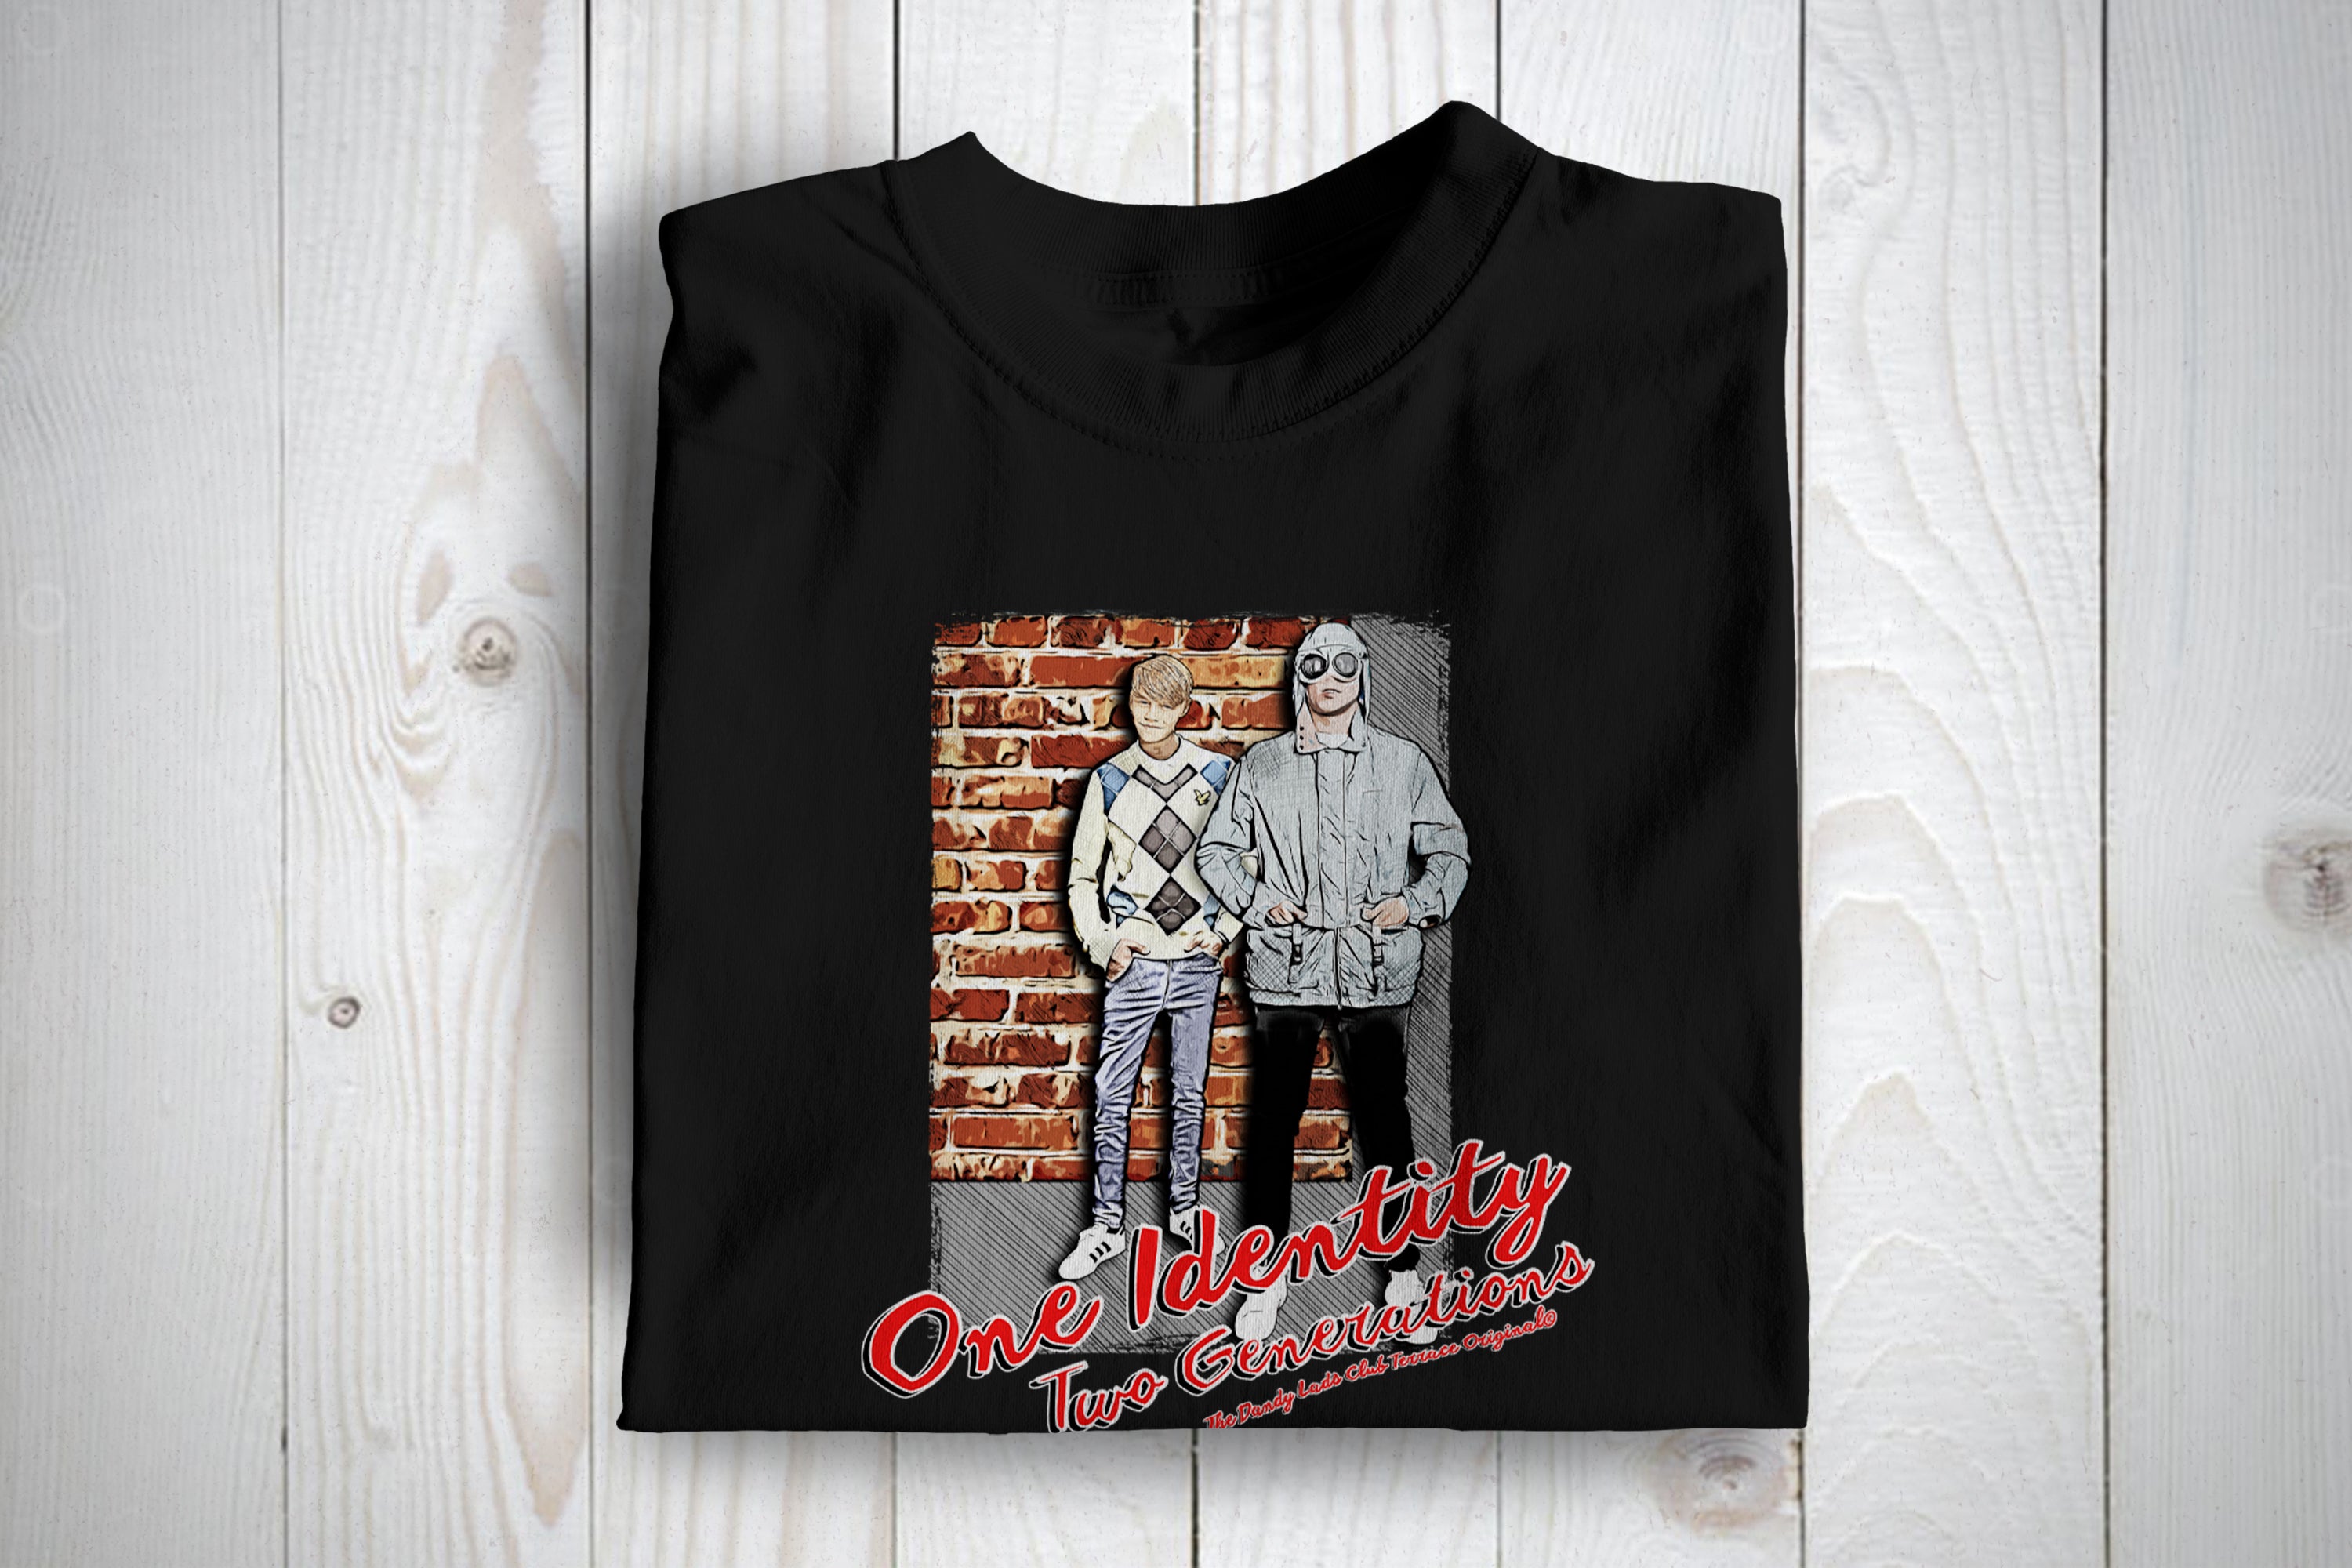 One Identity Two Generations 80s Football Casuals Awaydays T Shirt